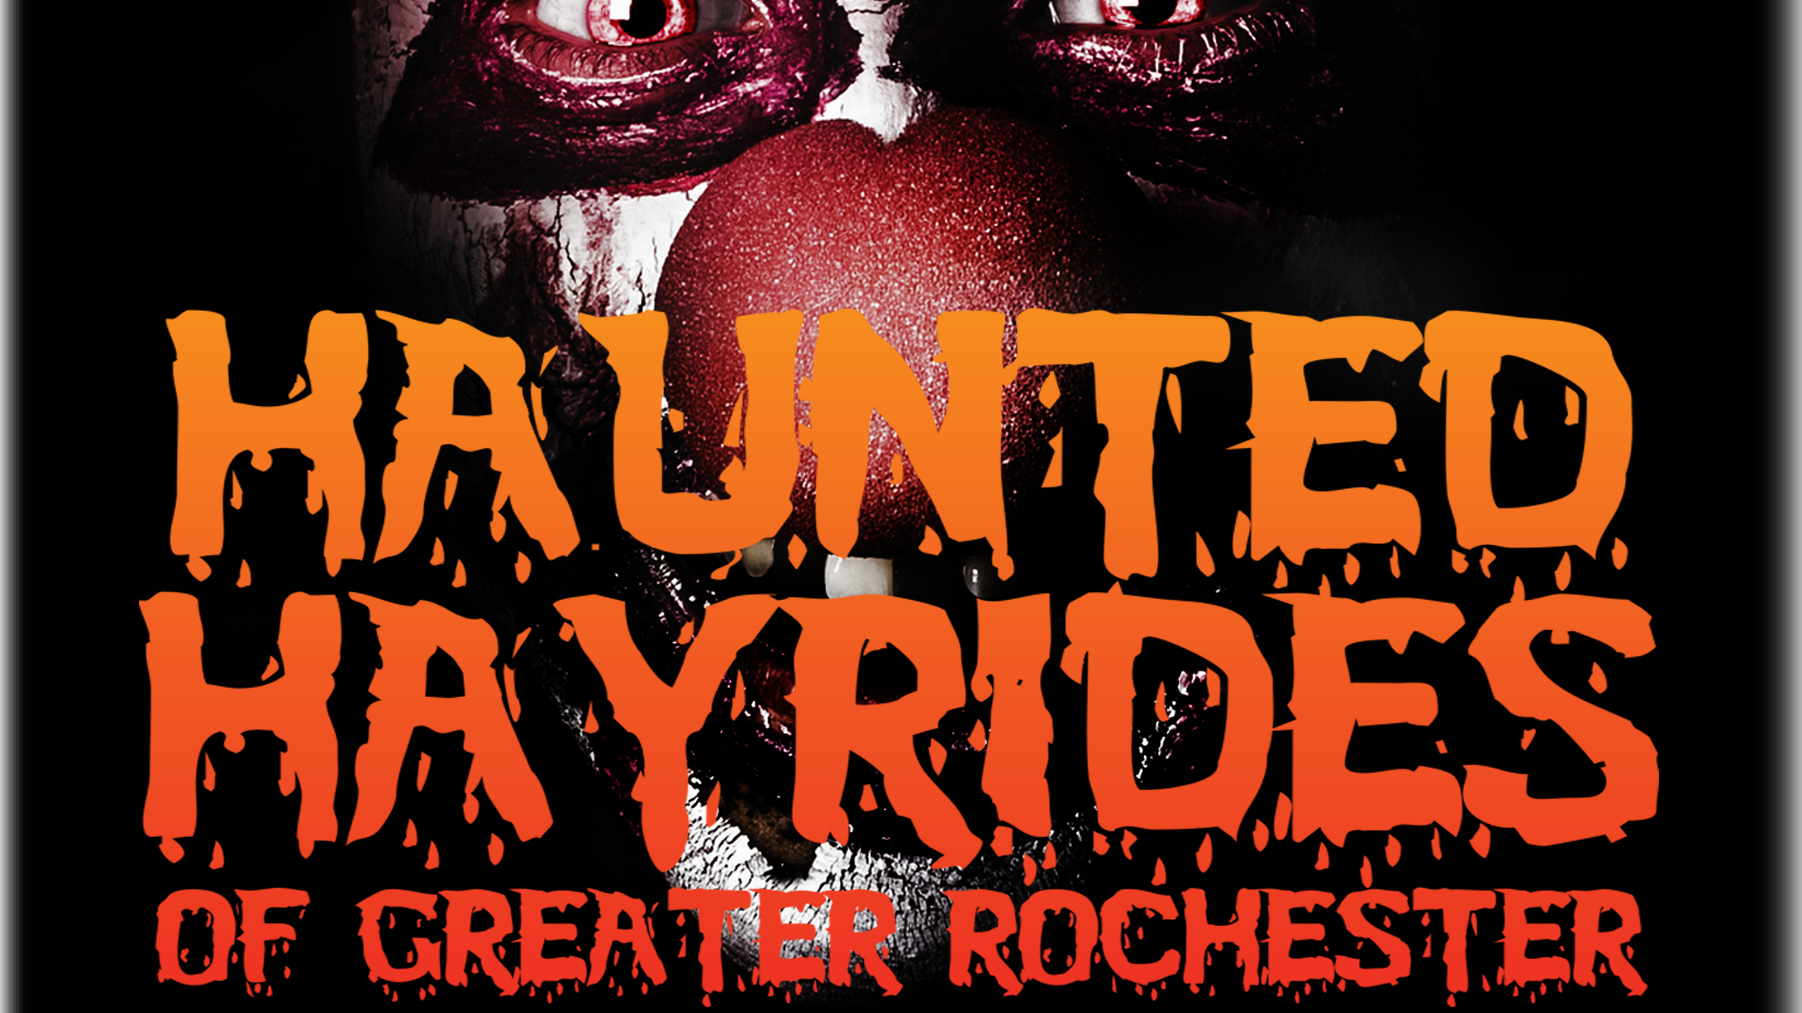 Haunted Hayride of Greater Rochester in Williamson ends due to ‘reorganization, staffing limitations’